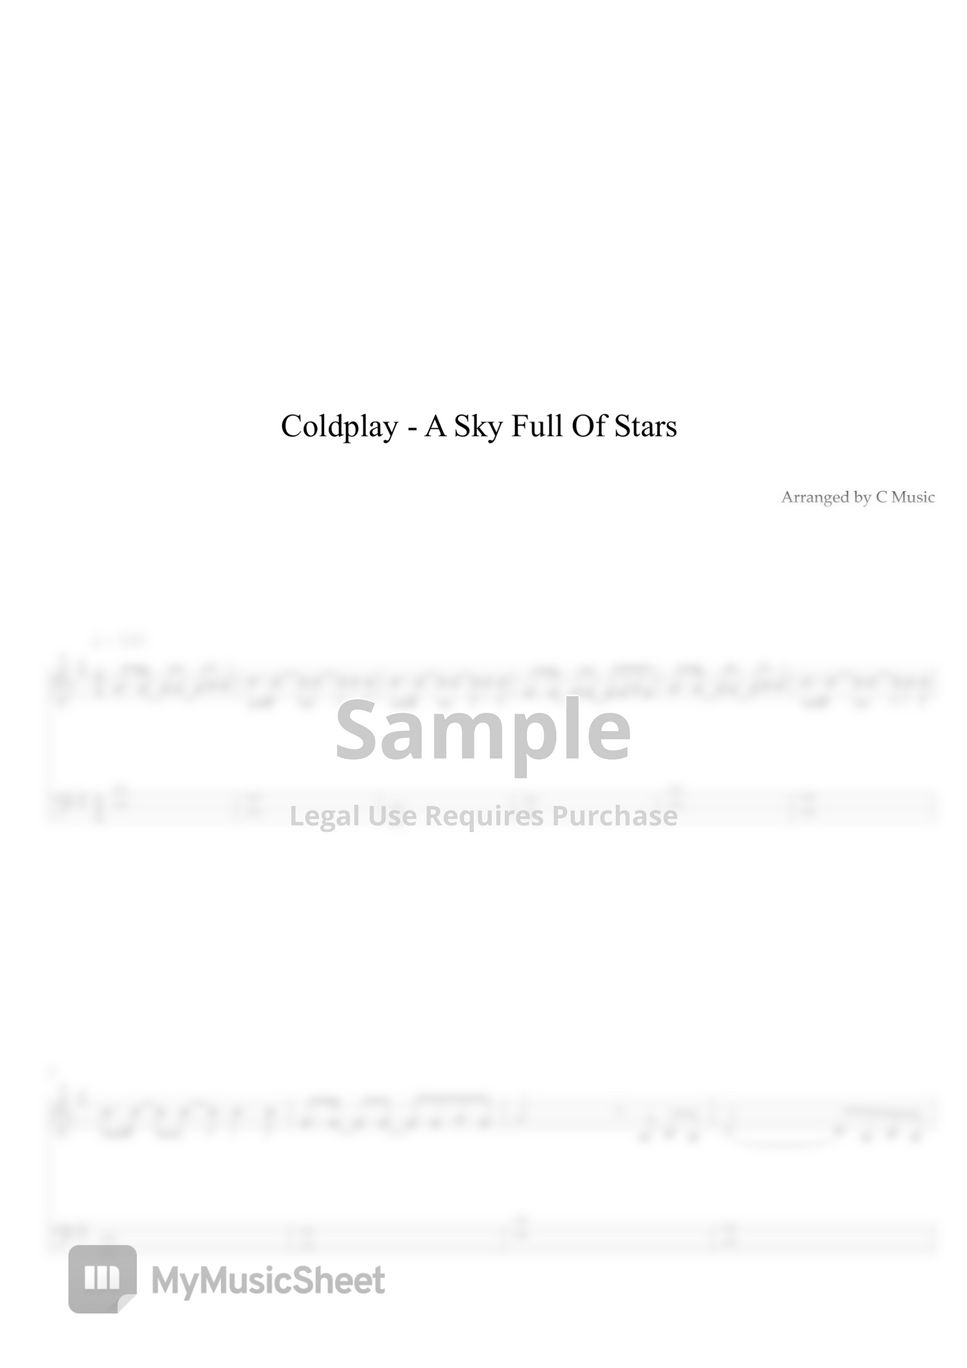 Coldplay - A Sky full of Stars (Easy Version) by C Music